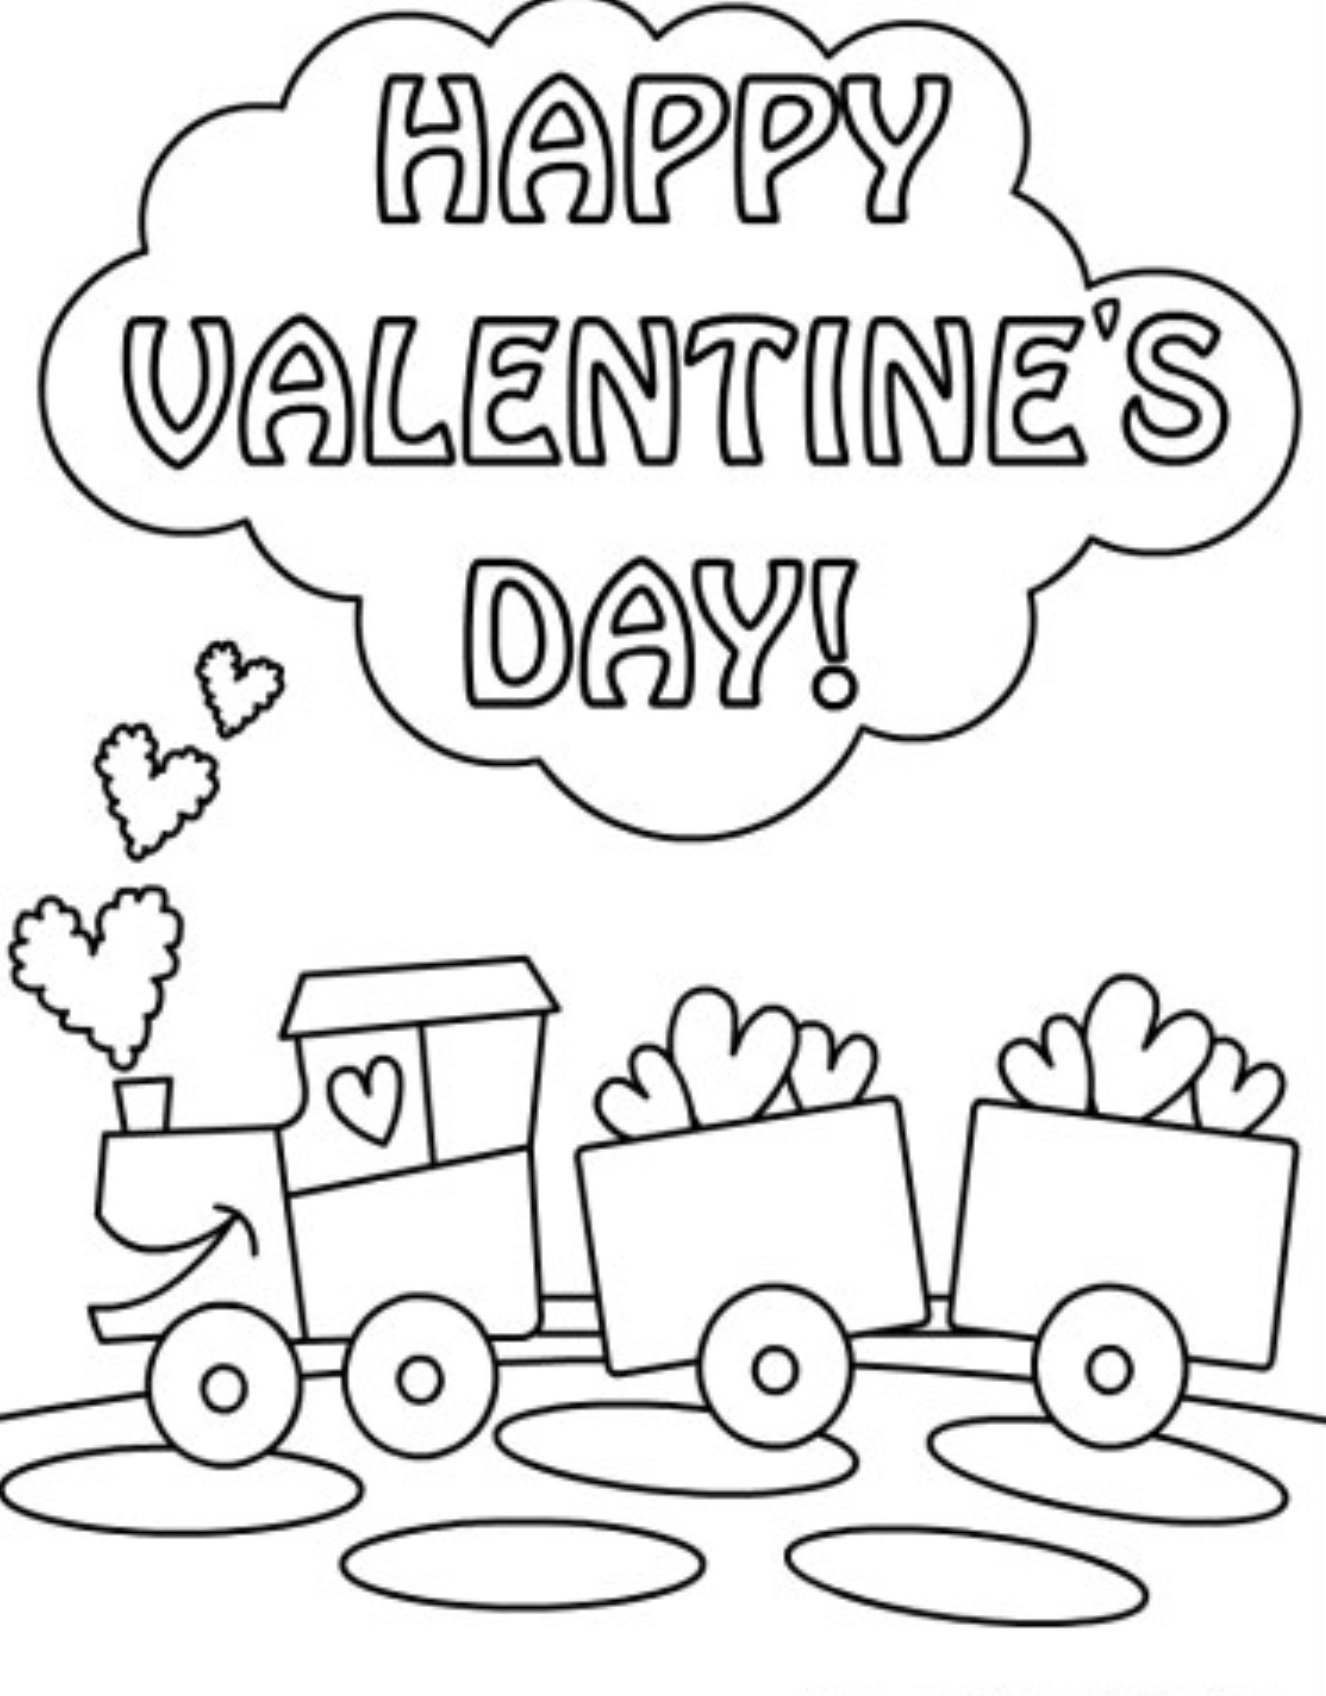 among us valentine coloring page